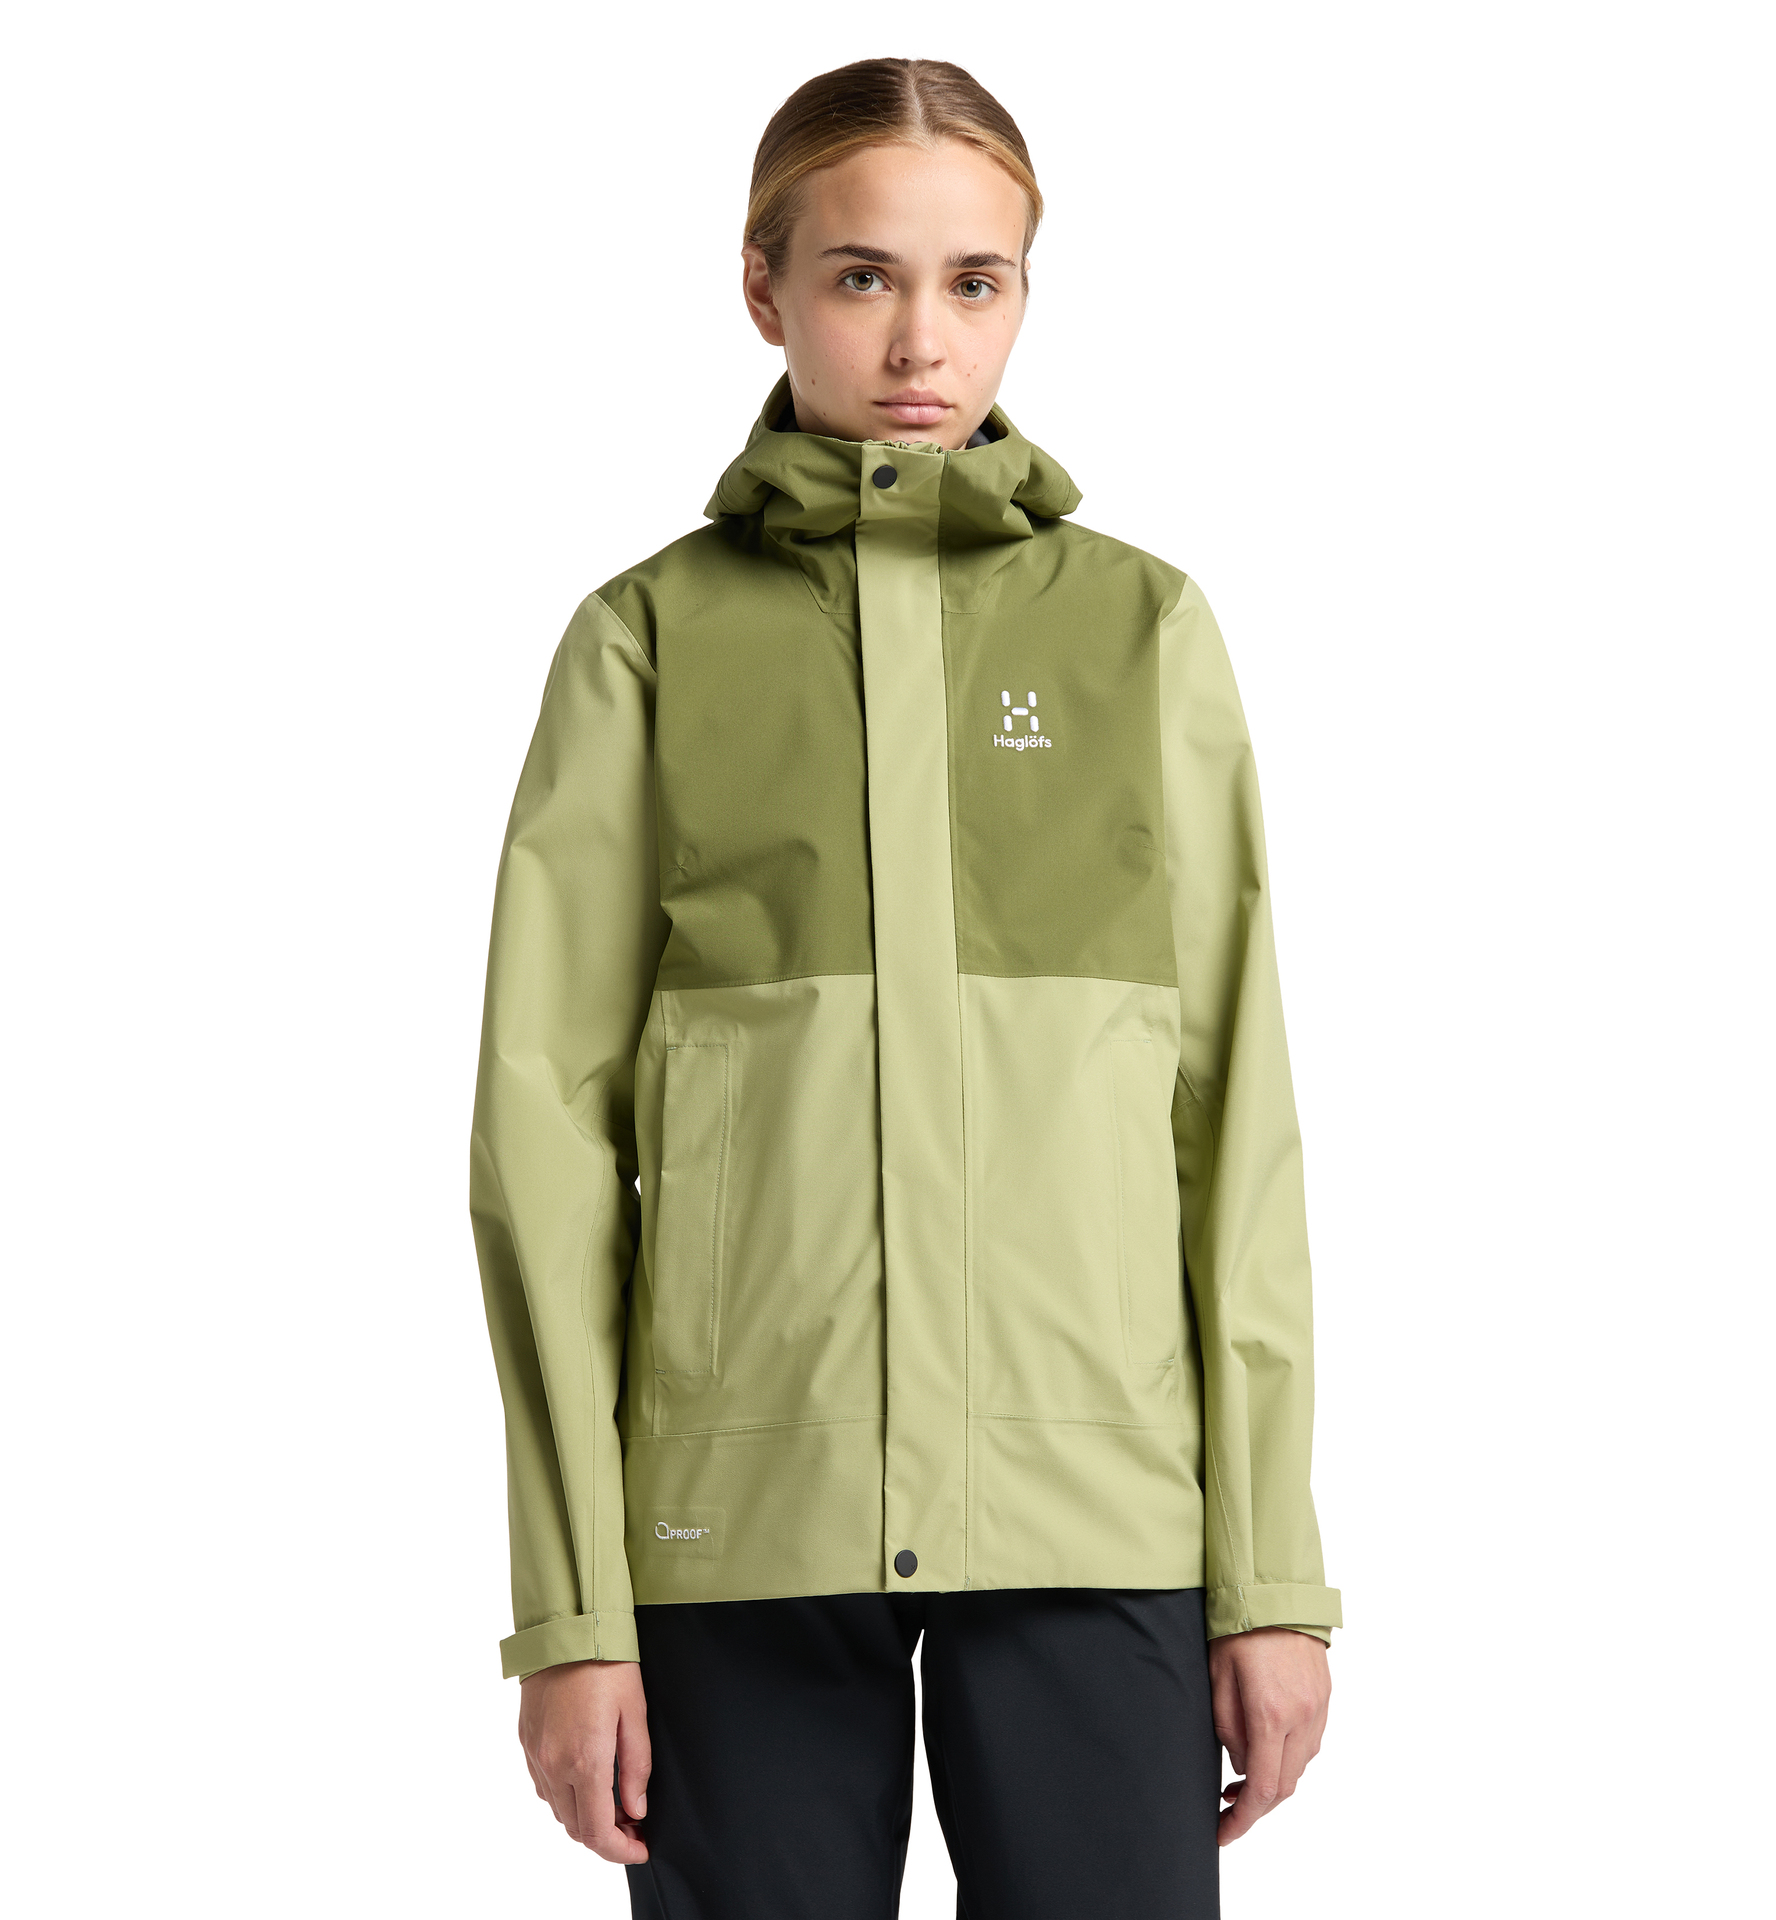 Koyal Proof Jacket Women | Thyme green/Olive green | Activities | Shell ...